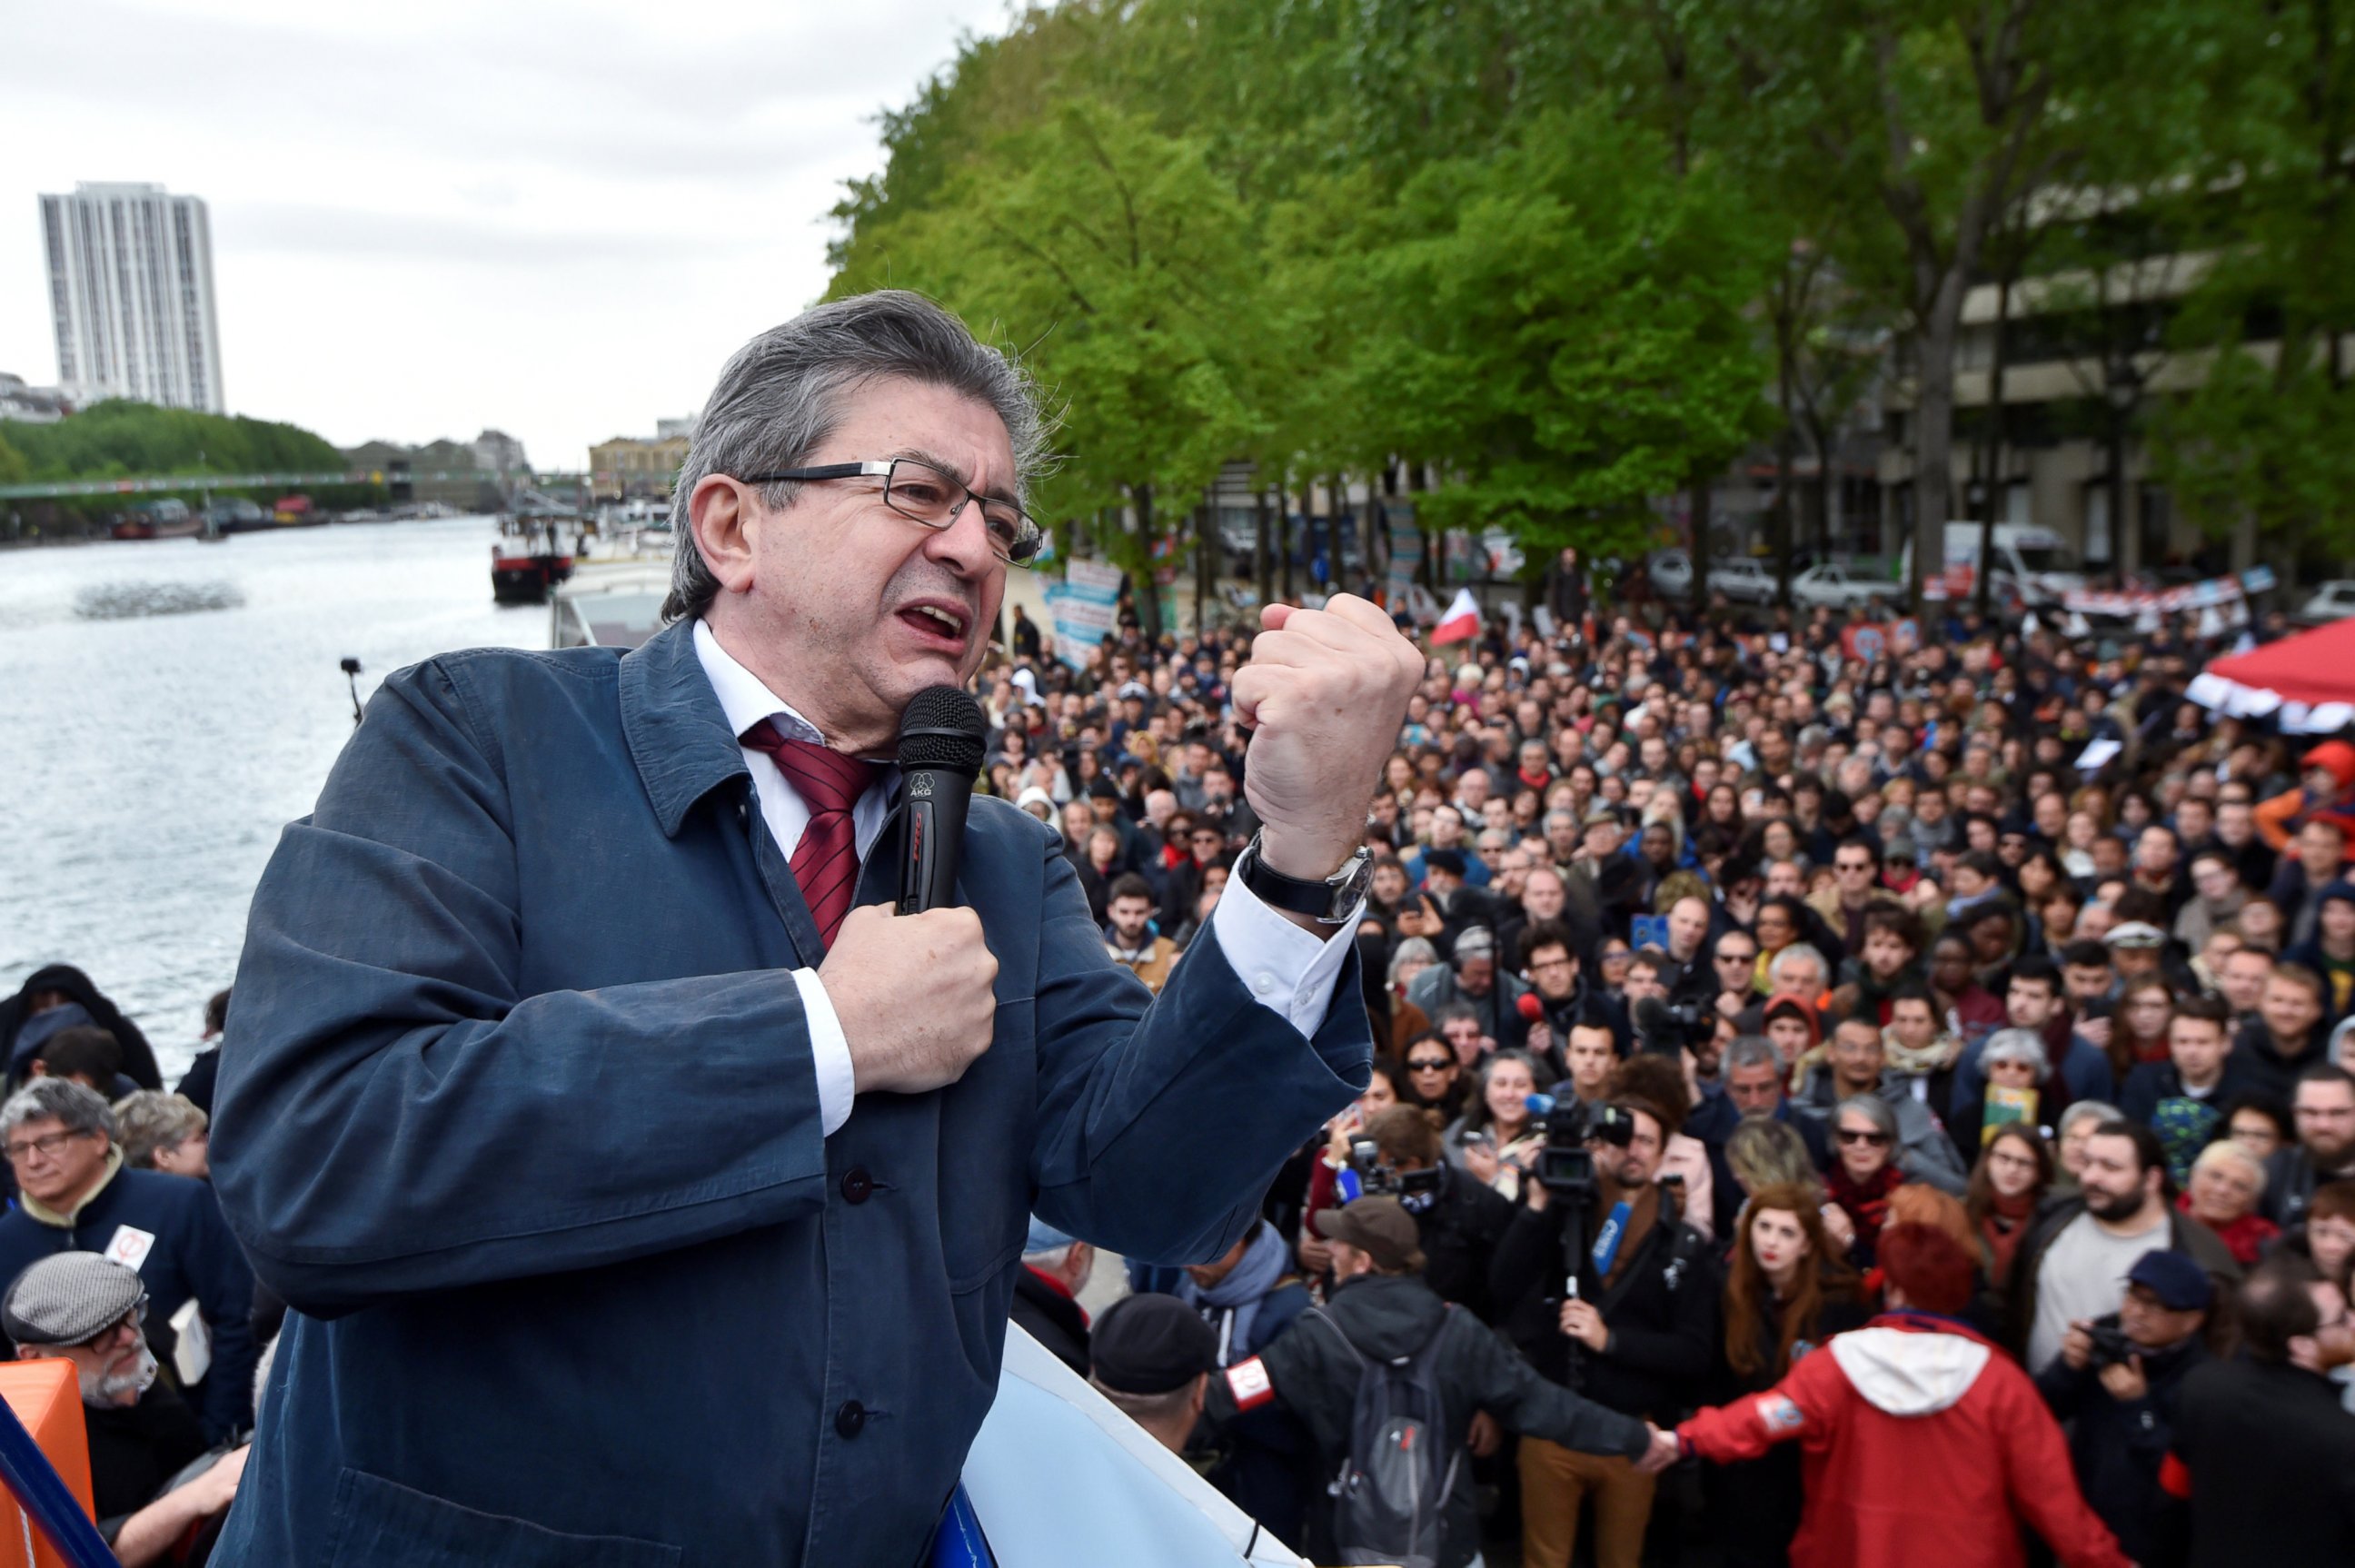 PHOTO: Jean-Luc Melenchon, candidate of the French far-left Parti de Gauche and candidate for the French 2017 presidential election, delivers a speech to supporters from a barge during a cruise on the canal de l'Ourcq in Paris, April 17, 2017.